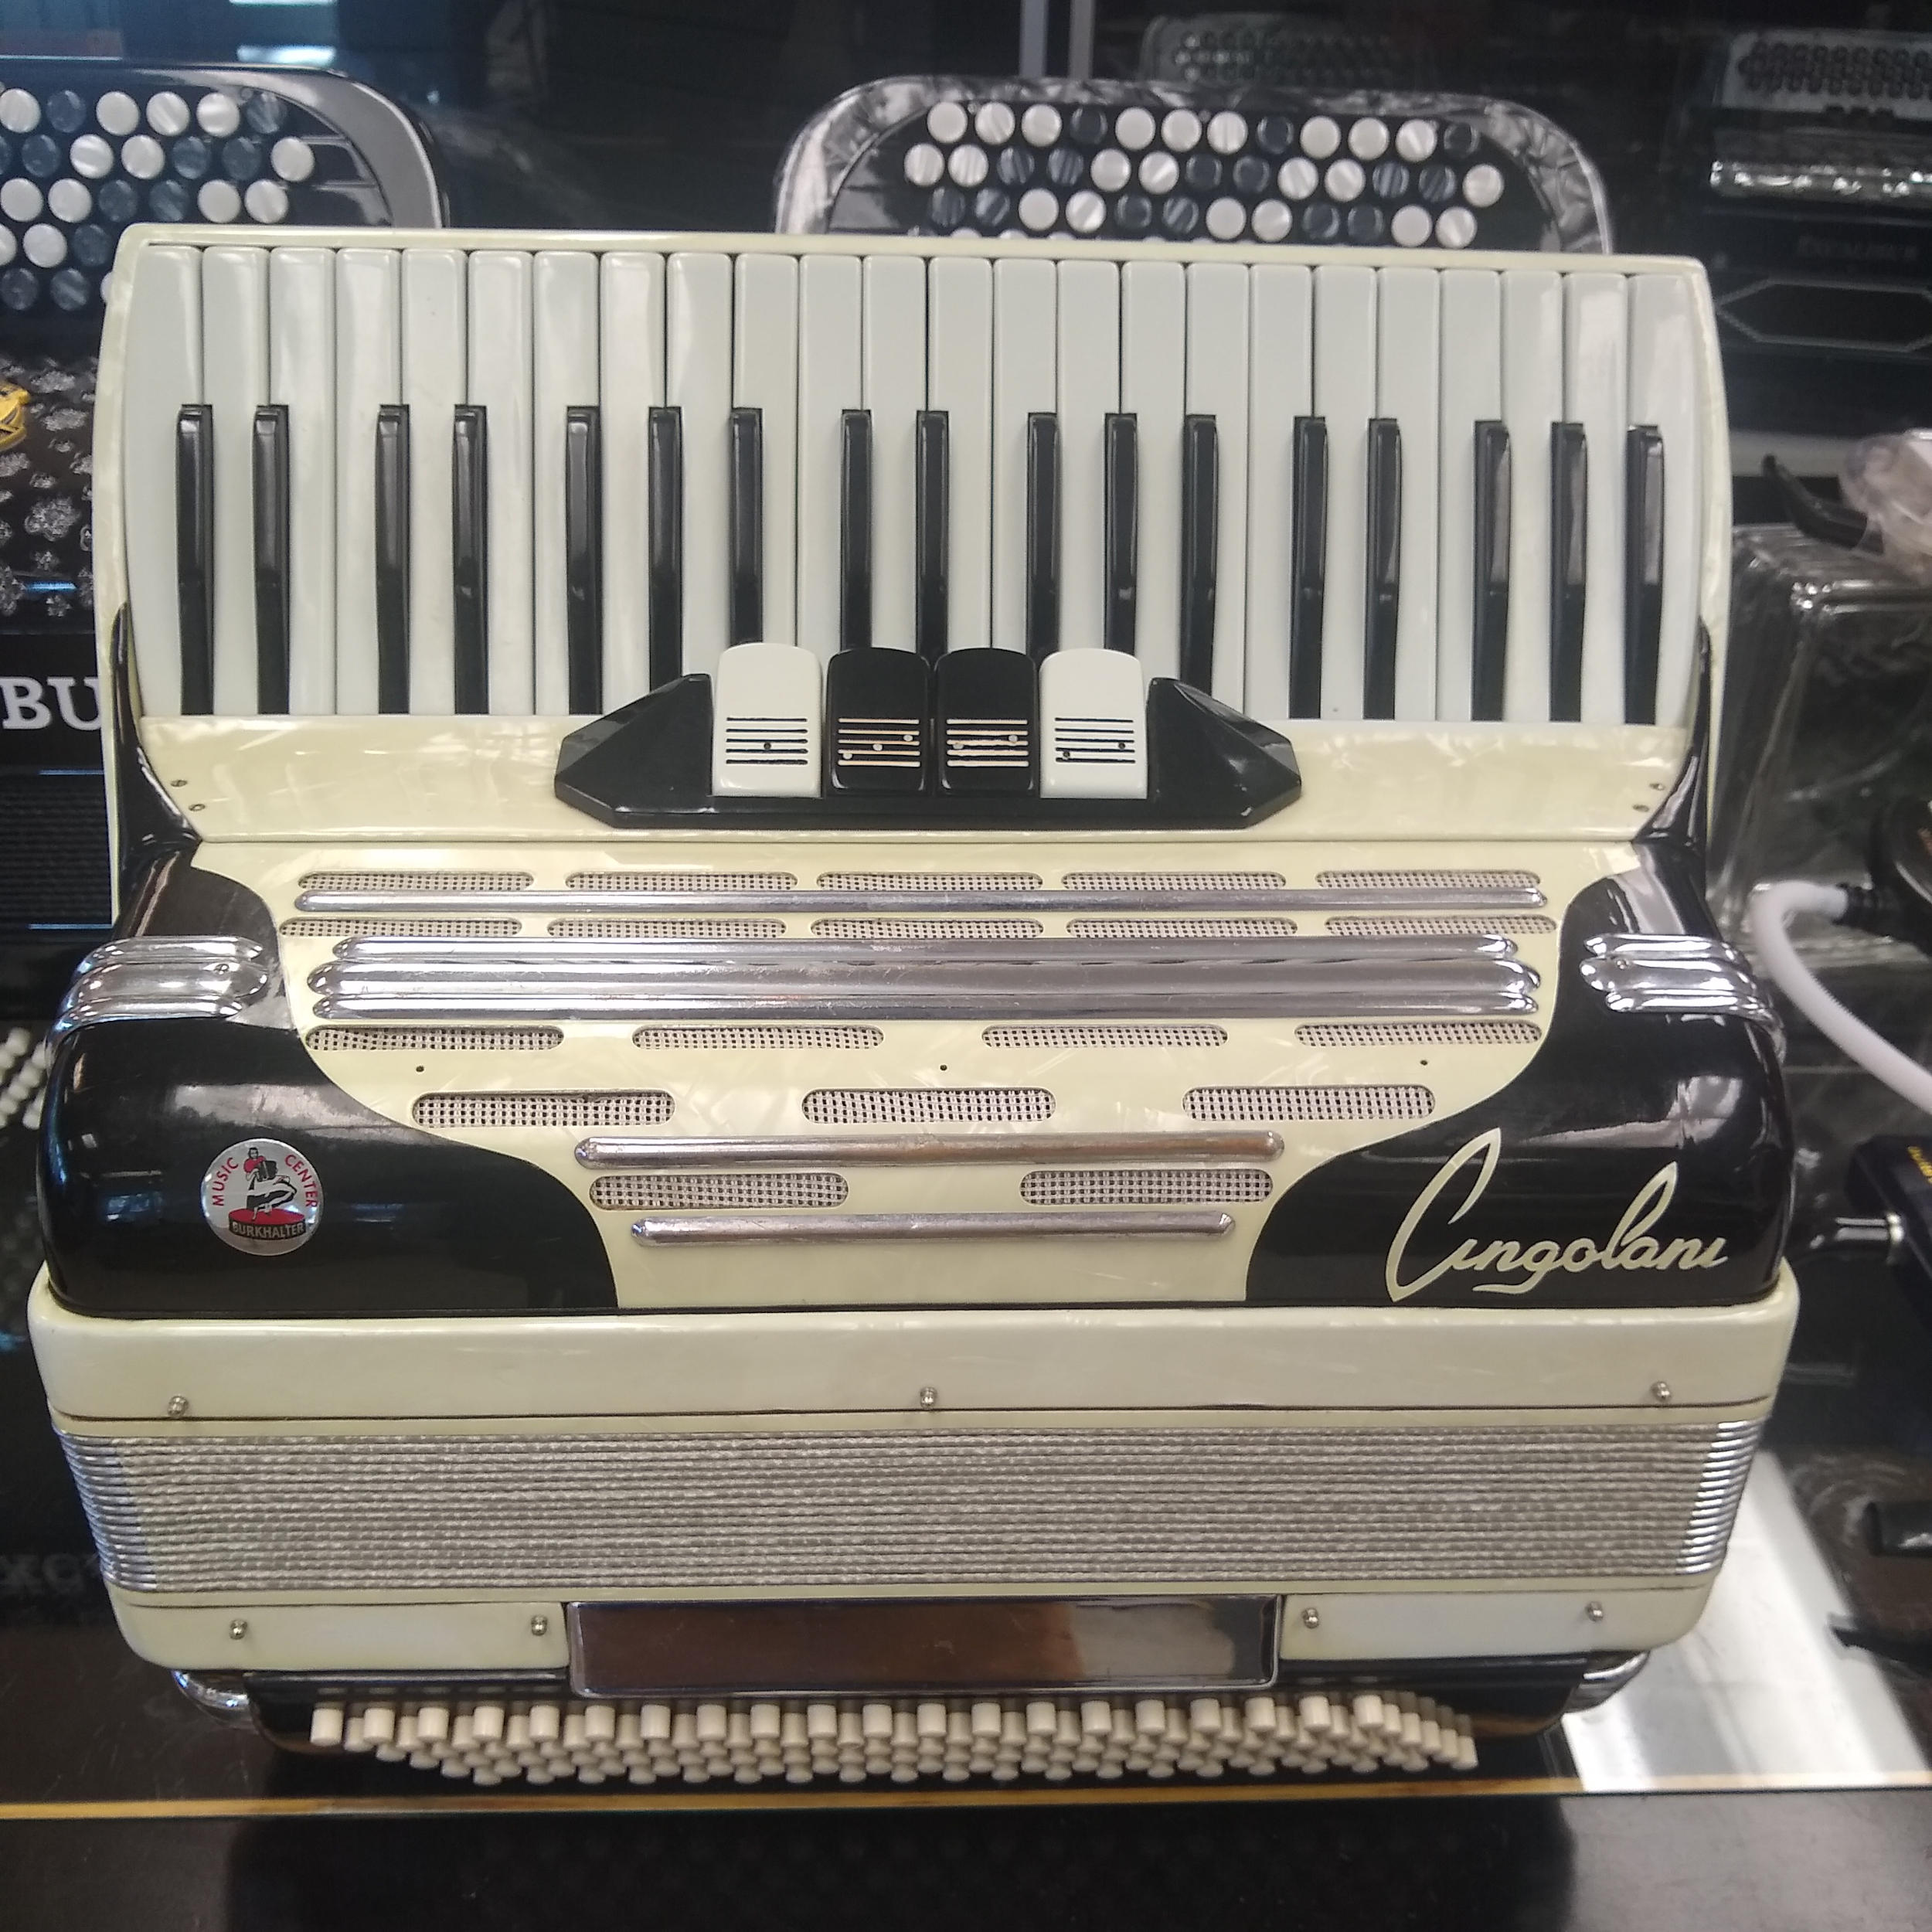 Used Accordions - Excelsior - Jim Laabs Music Store